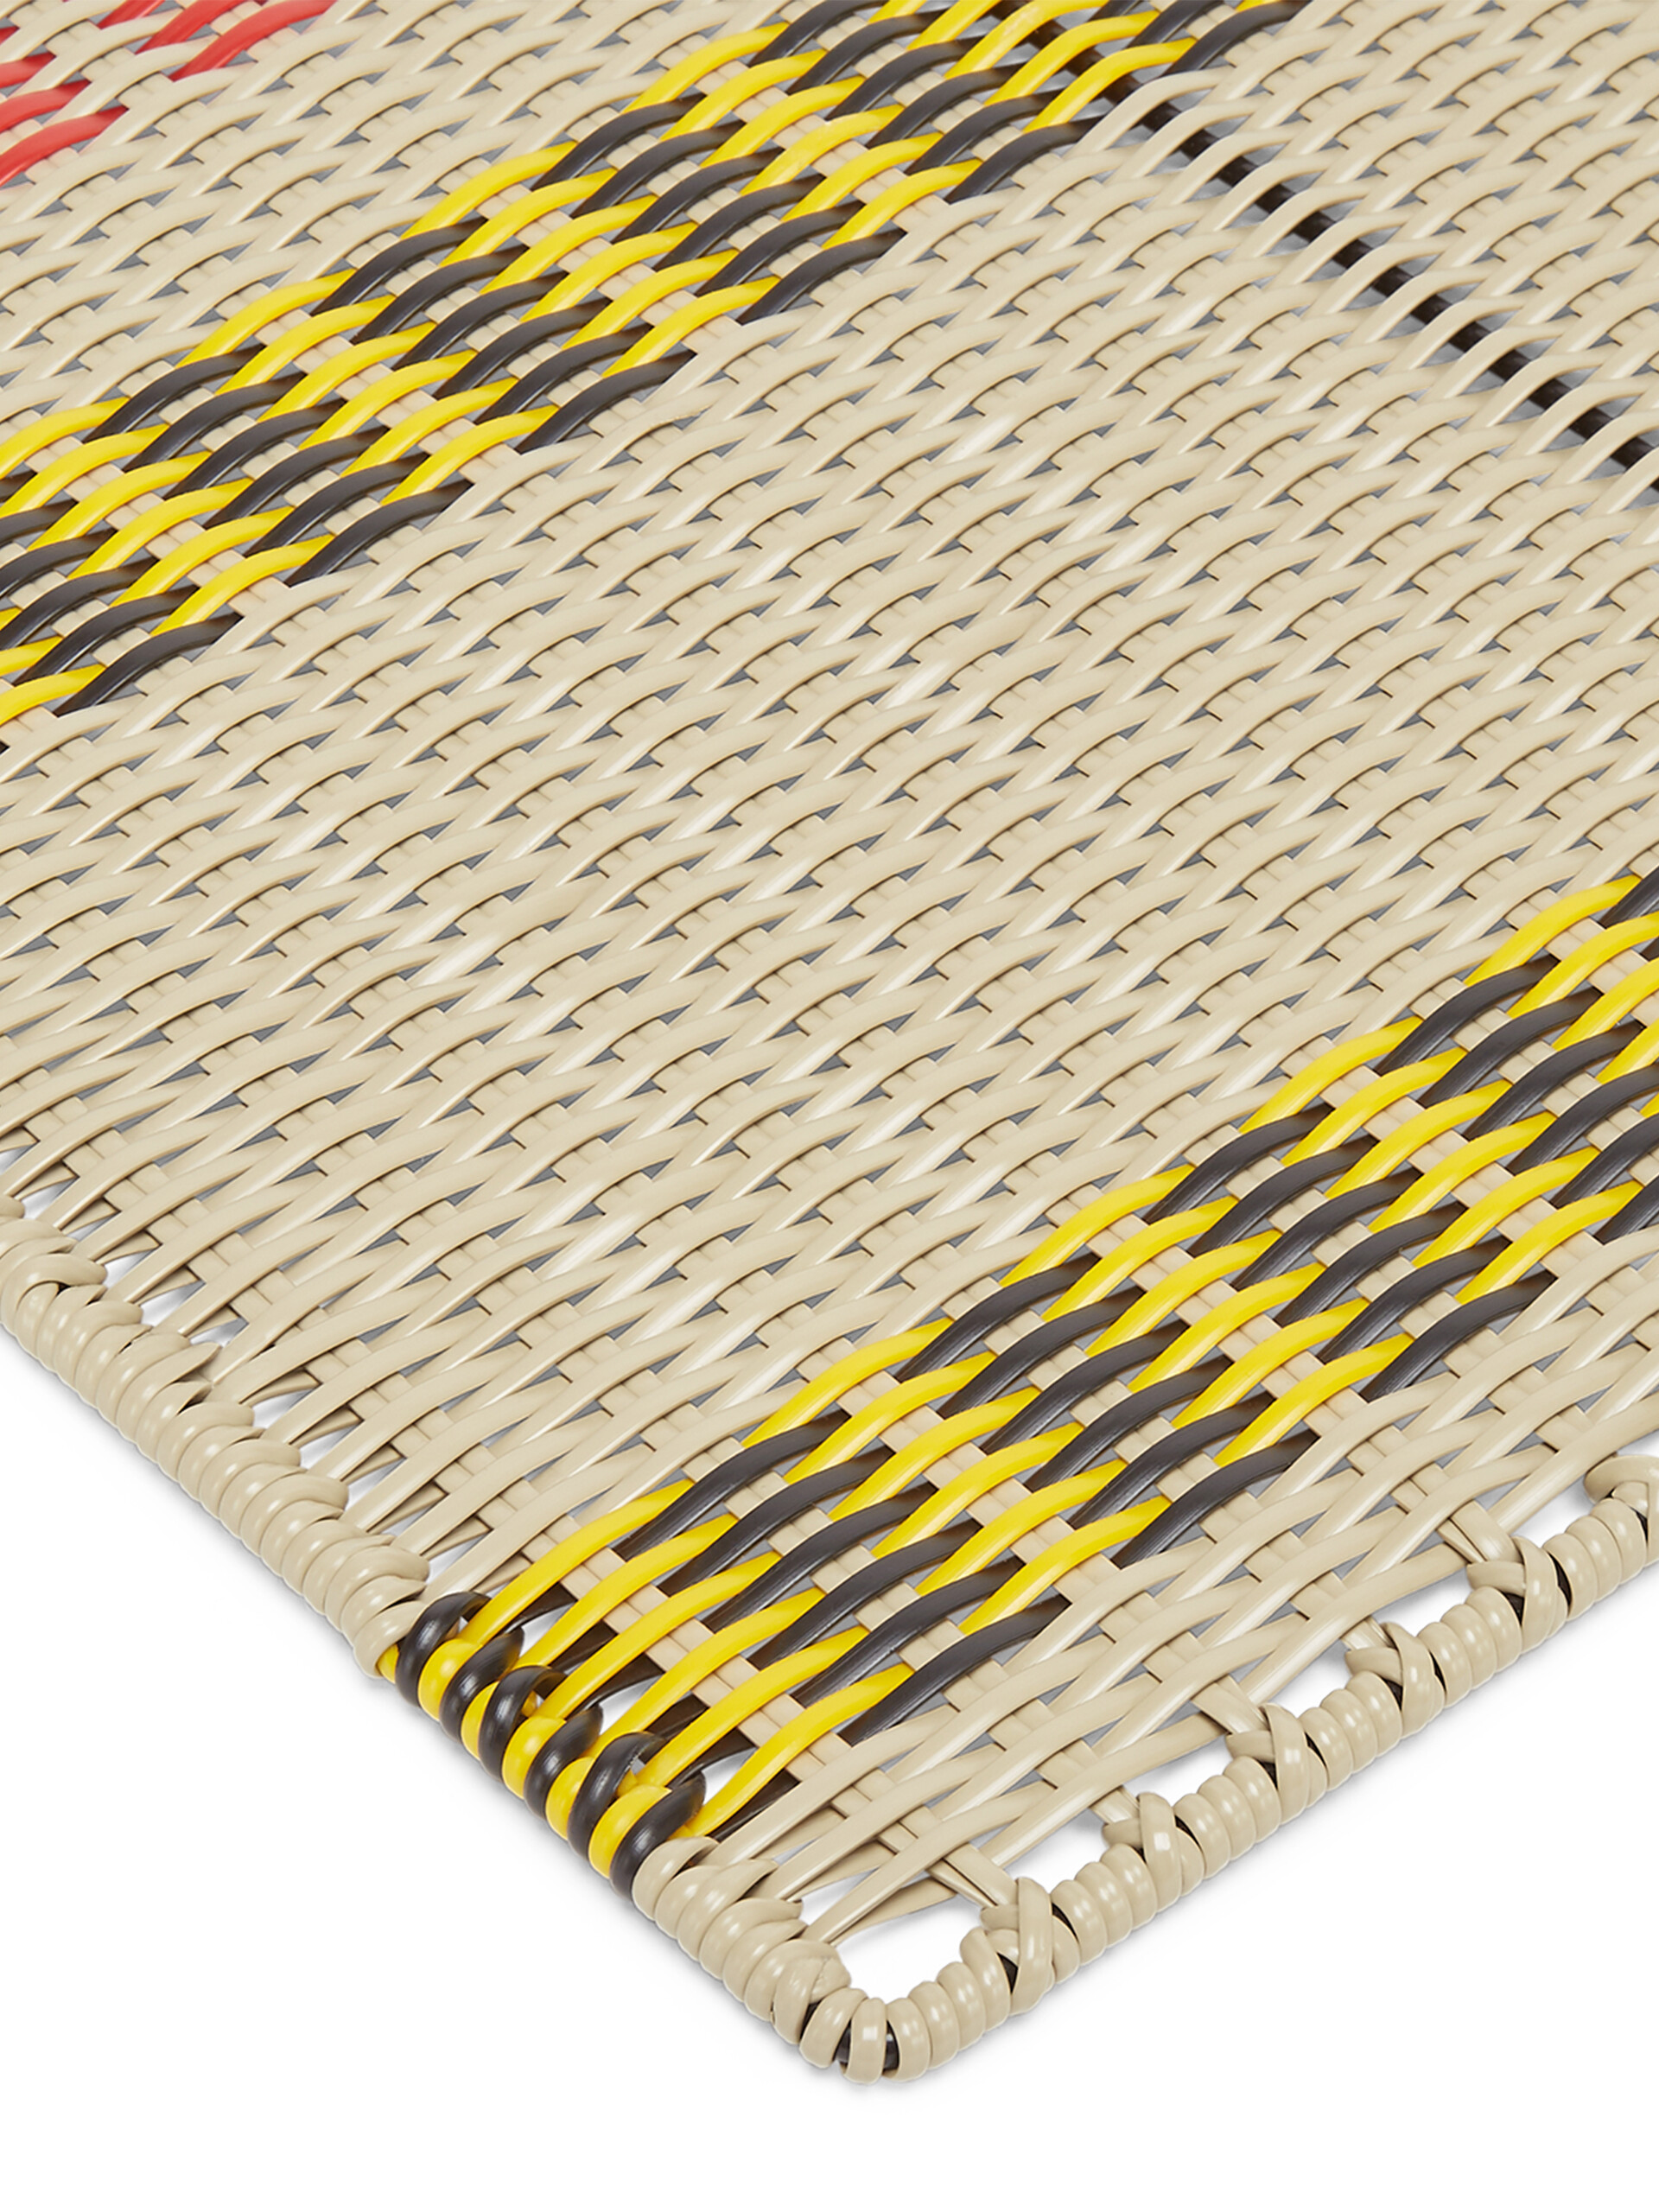 MARNI MARKET rectangular placemat with striped motif in iron and yellow, black, red and beige woven PVC - Home Accessories - Image 3